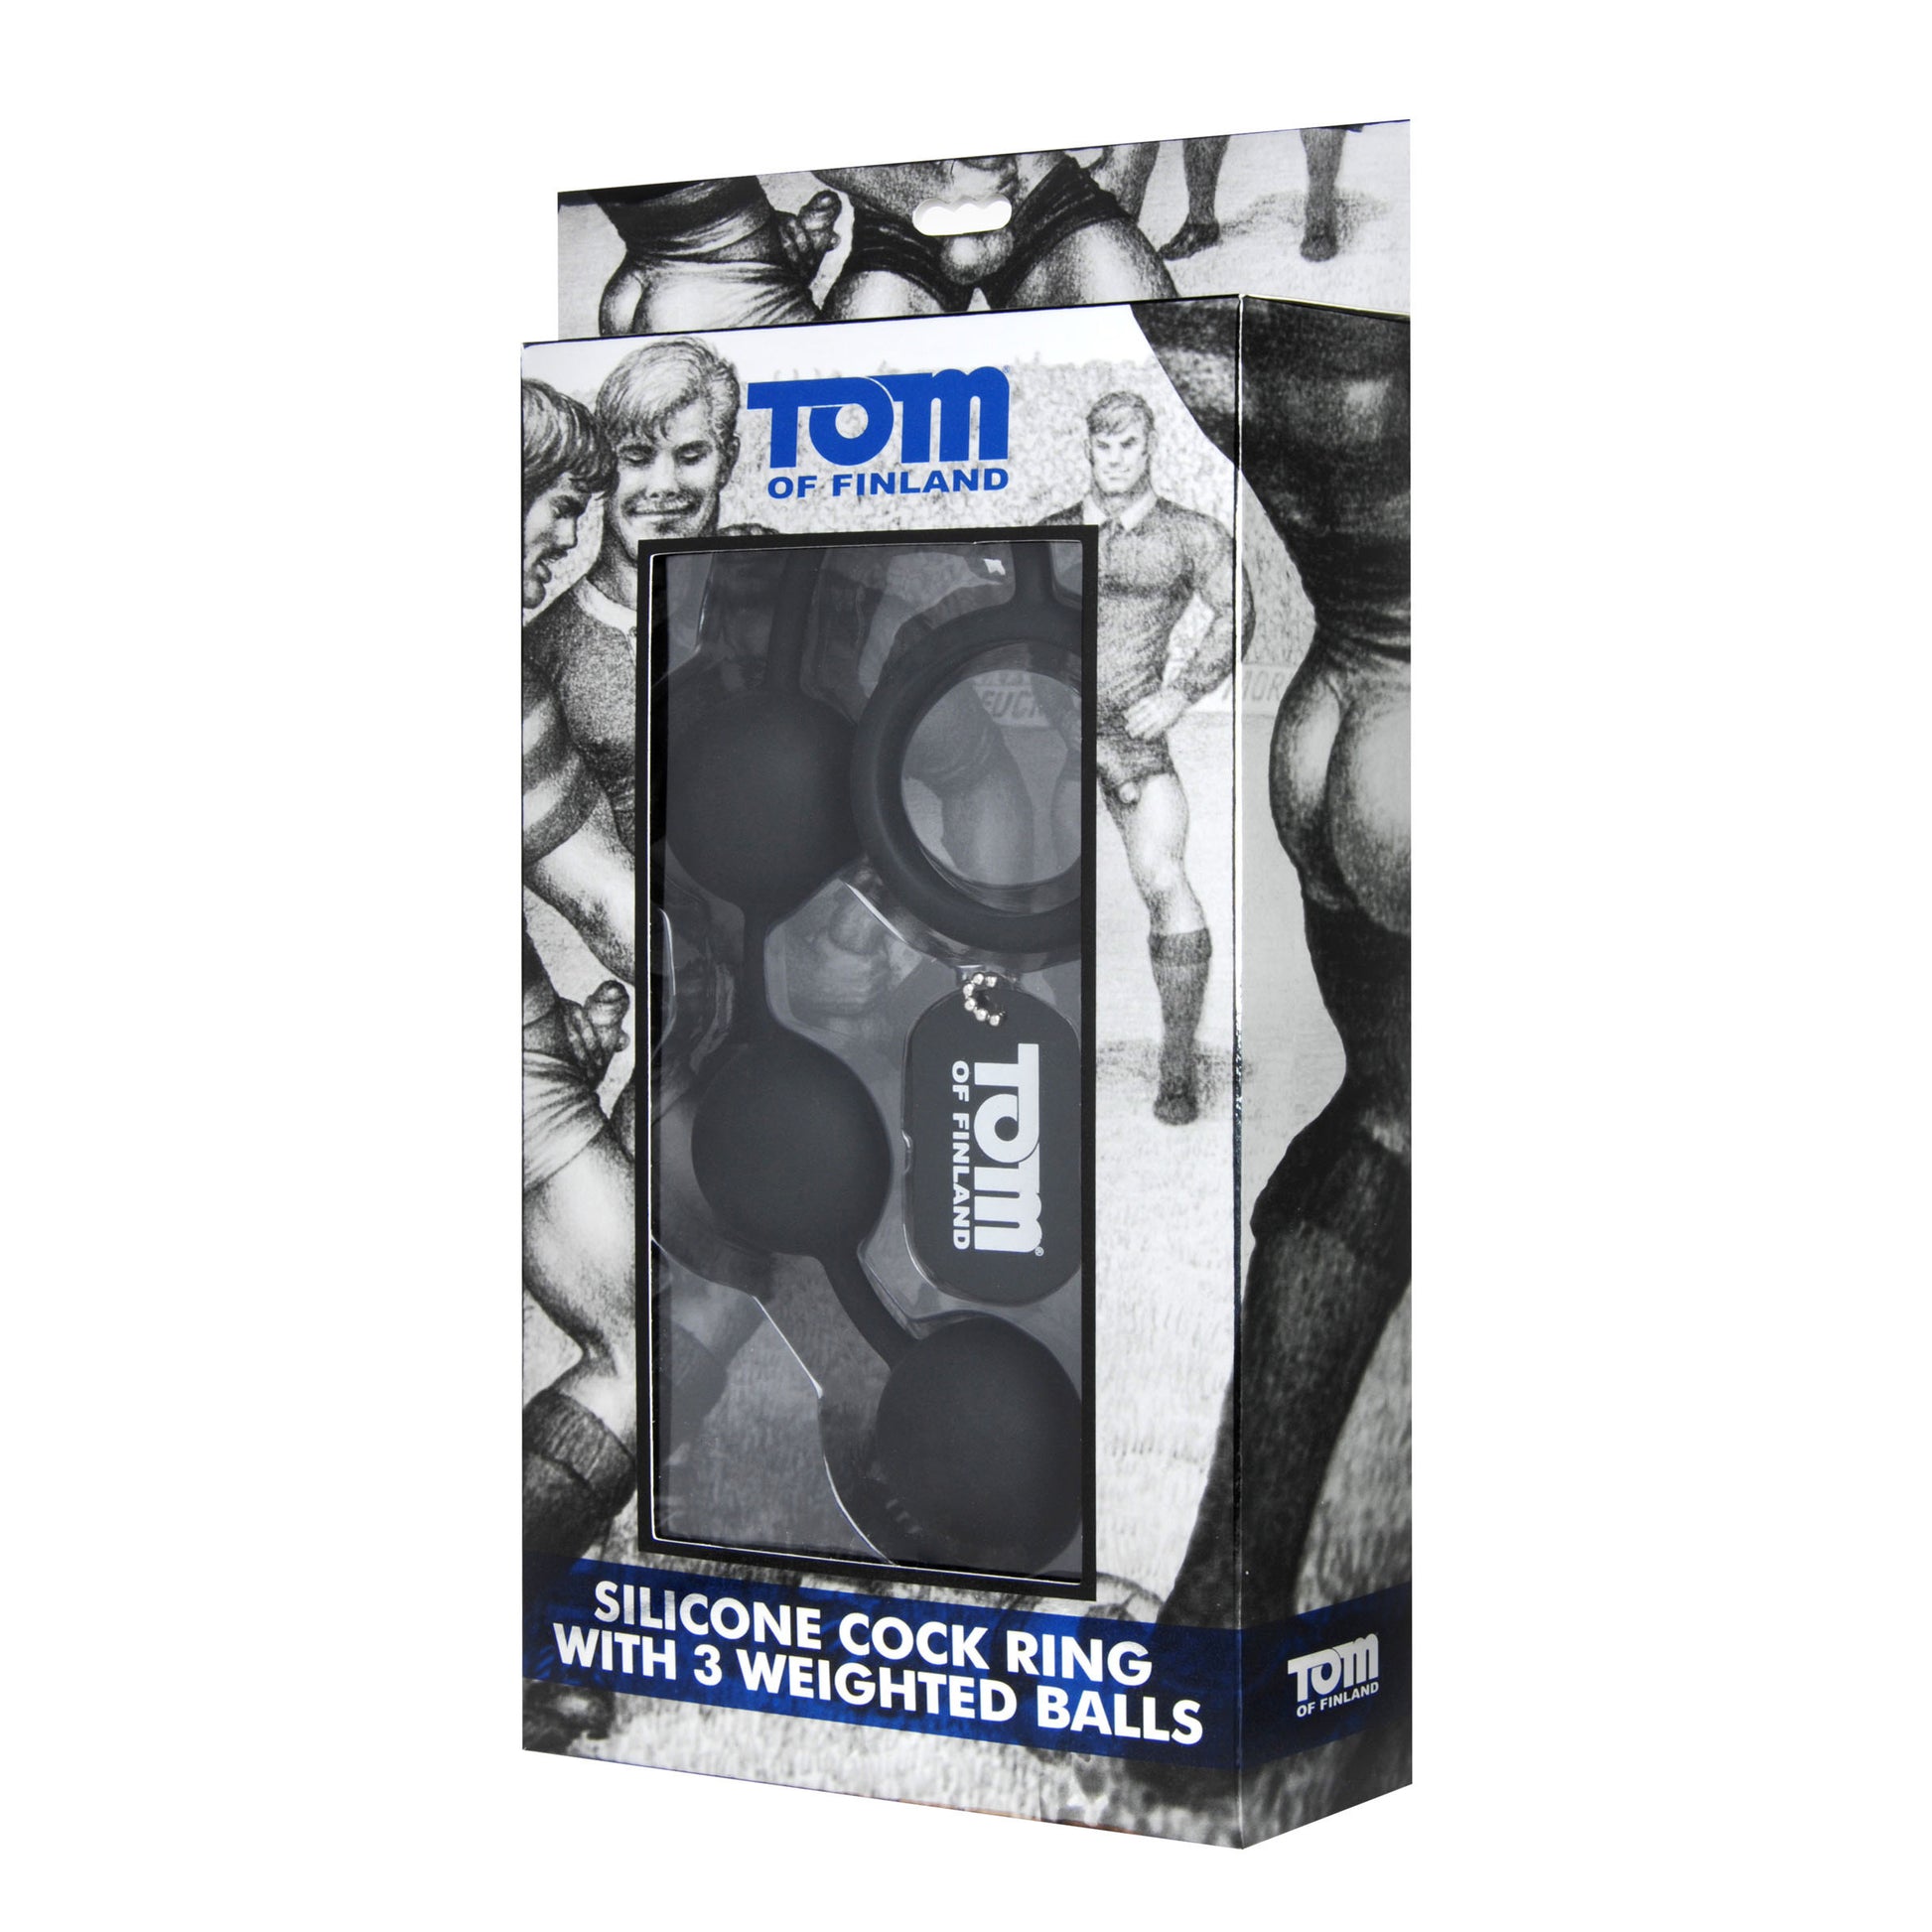 Tom of Finland Silicone Cock Ring with 3 Weighted Balls - UABDSM